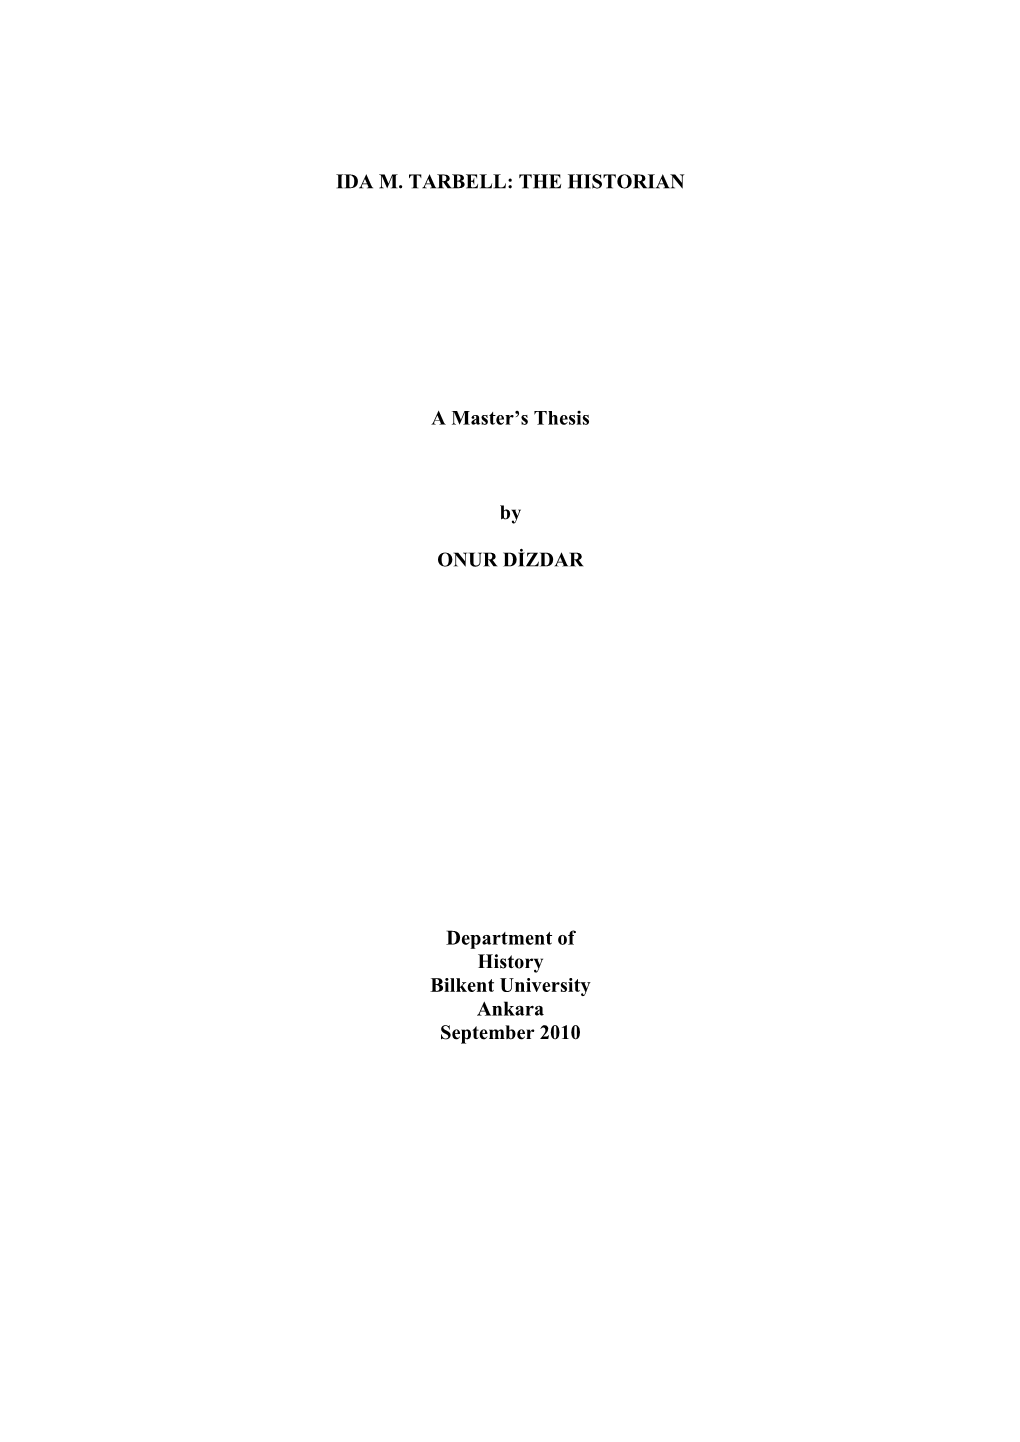 IDA M. TARBELL: the HISTORIAN a Master's Thesis by ONUR DĐZDAR